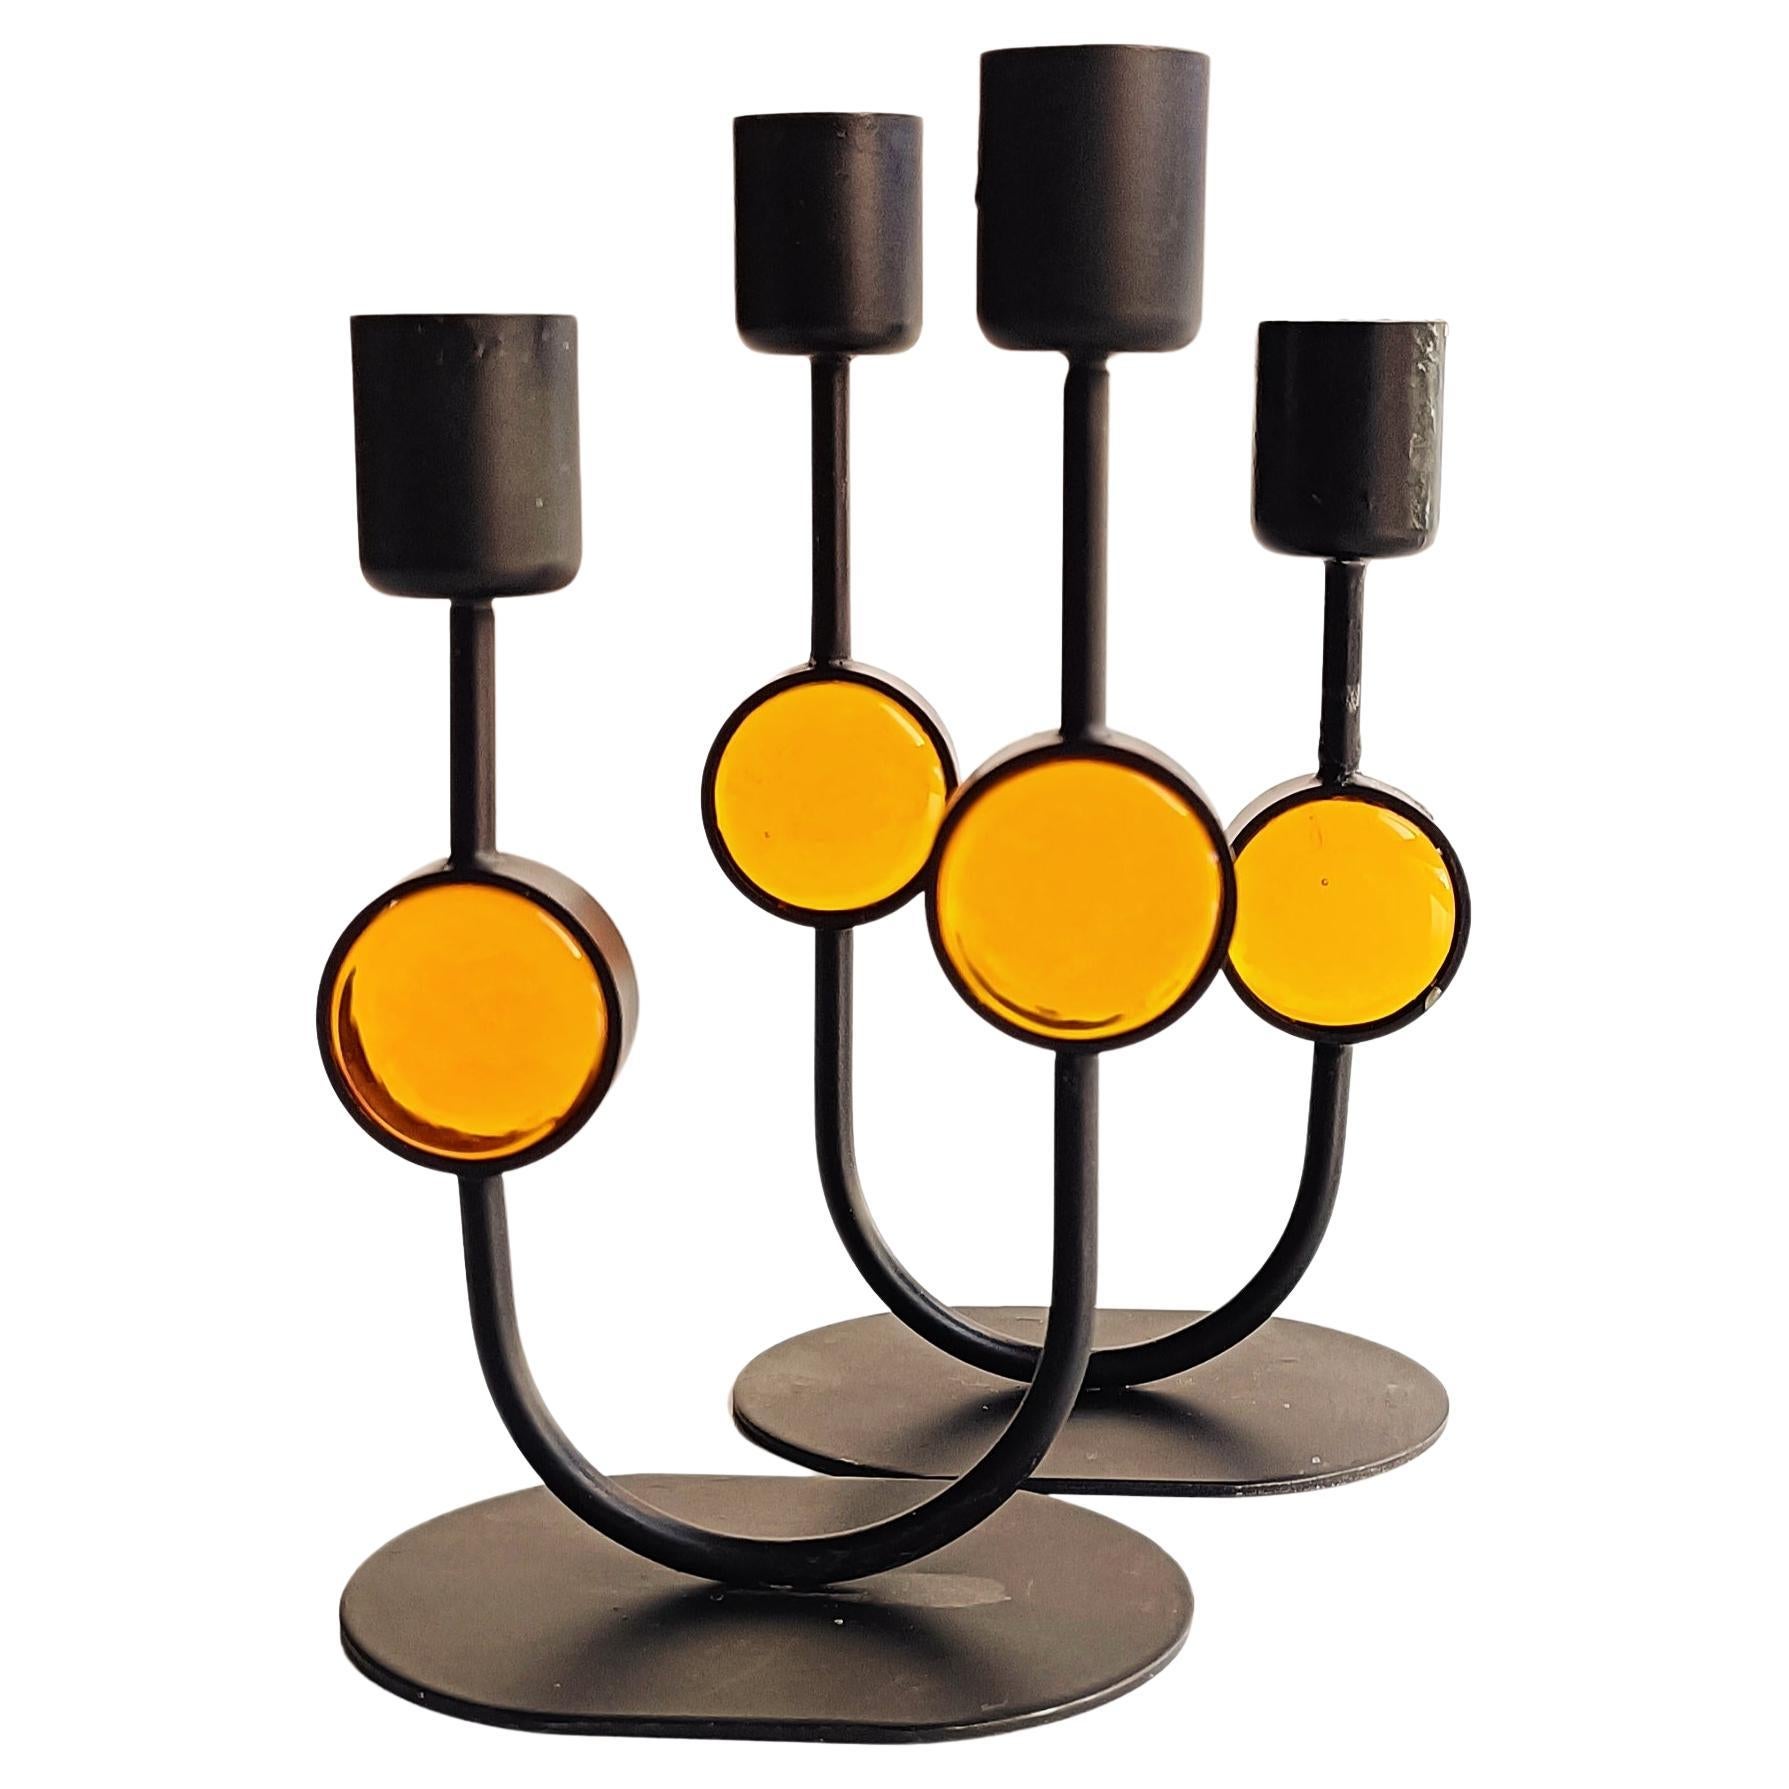 Mid-20th Century Scandinavian Modern Gunnar Under for Ystad Metal Signed Pair of Candle Holders For Sale